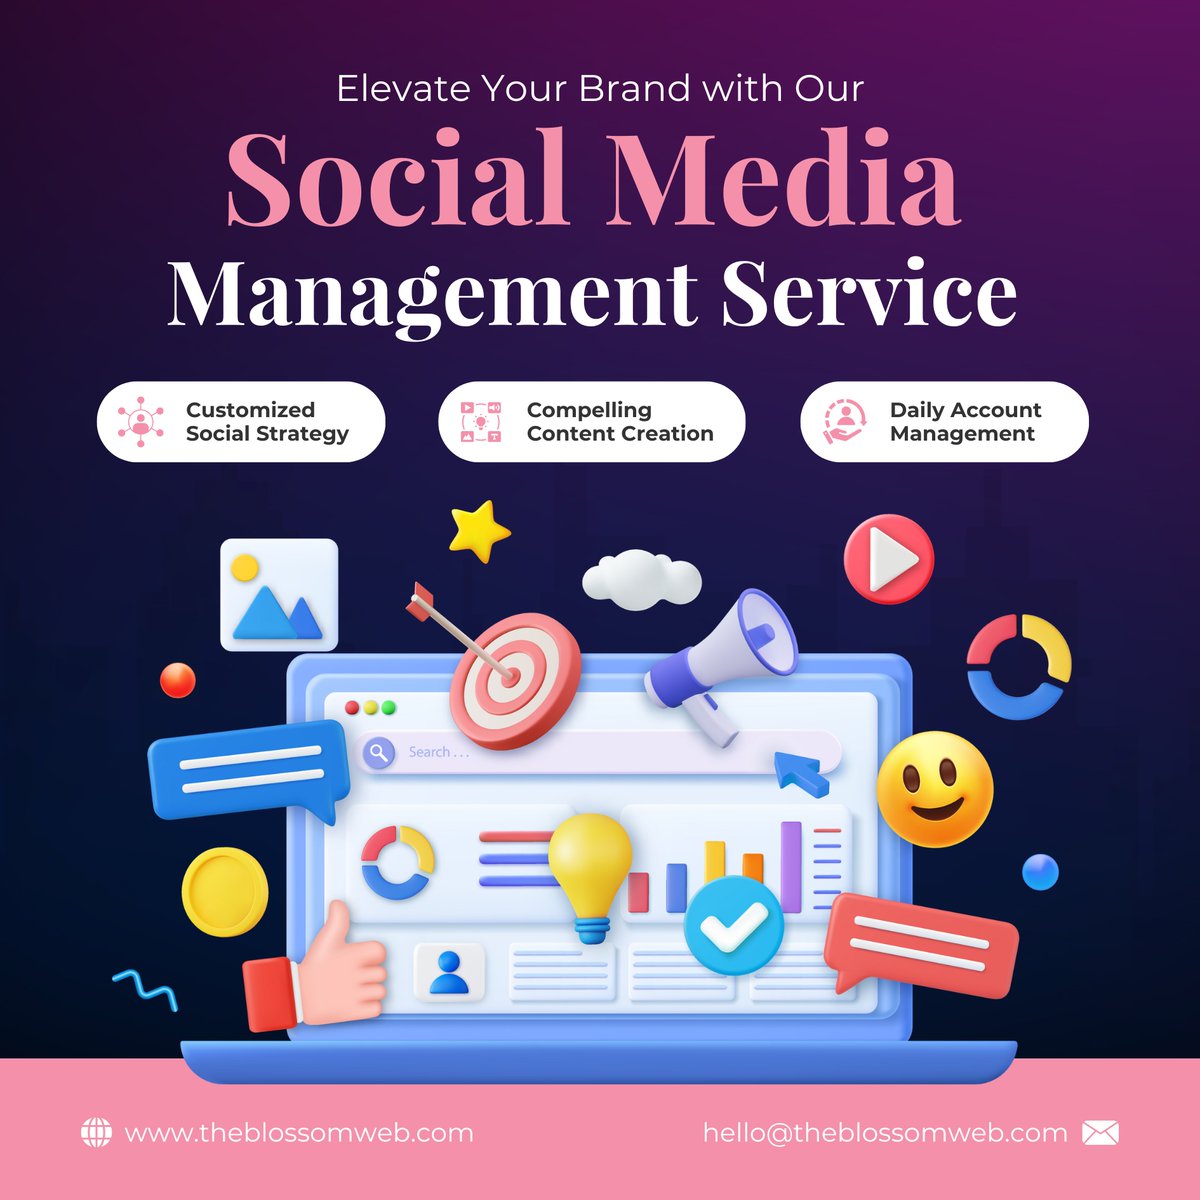 Unlock the power of social media with our expert Social Media Management Service! Let us elevate your online presence while you focus on what you do best.

#socialmediamanagement #boostyourbrand #engagement #smm #growyouraudience #london #newyork #blossomwebstudio